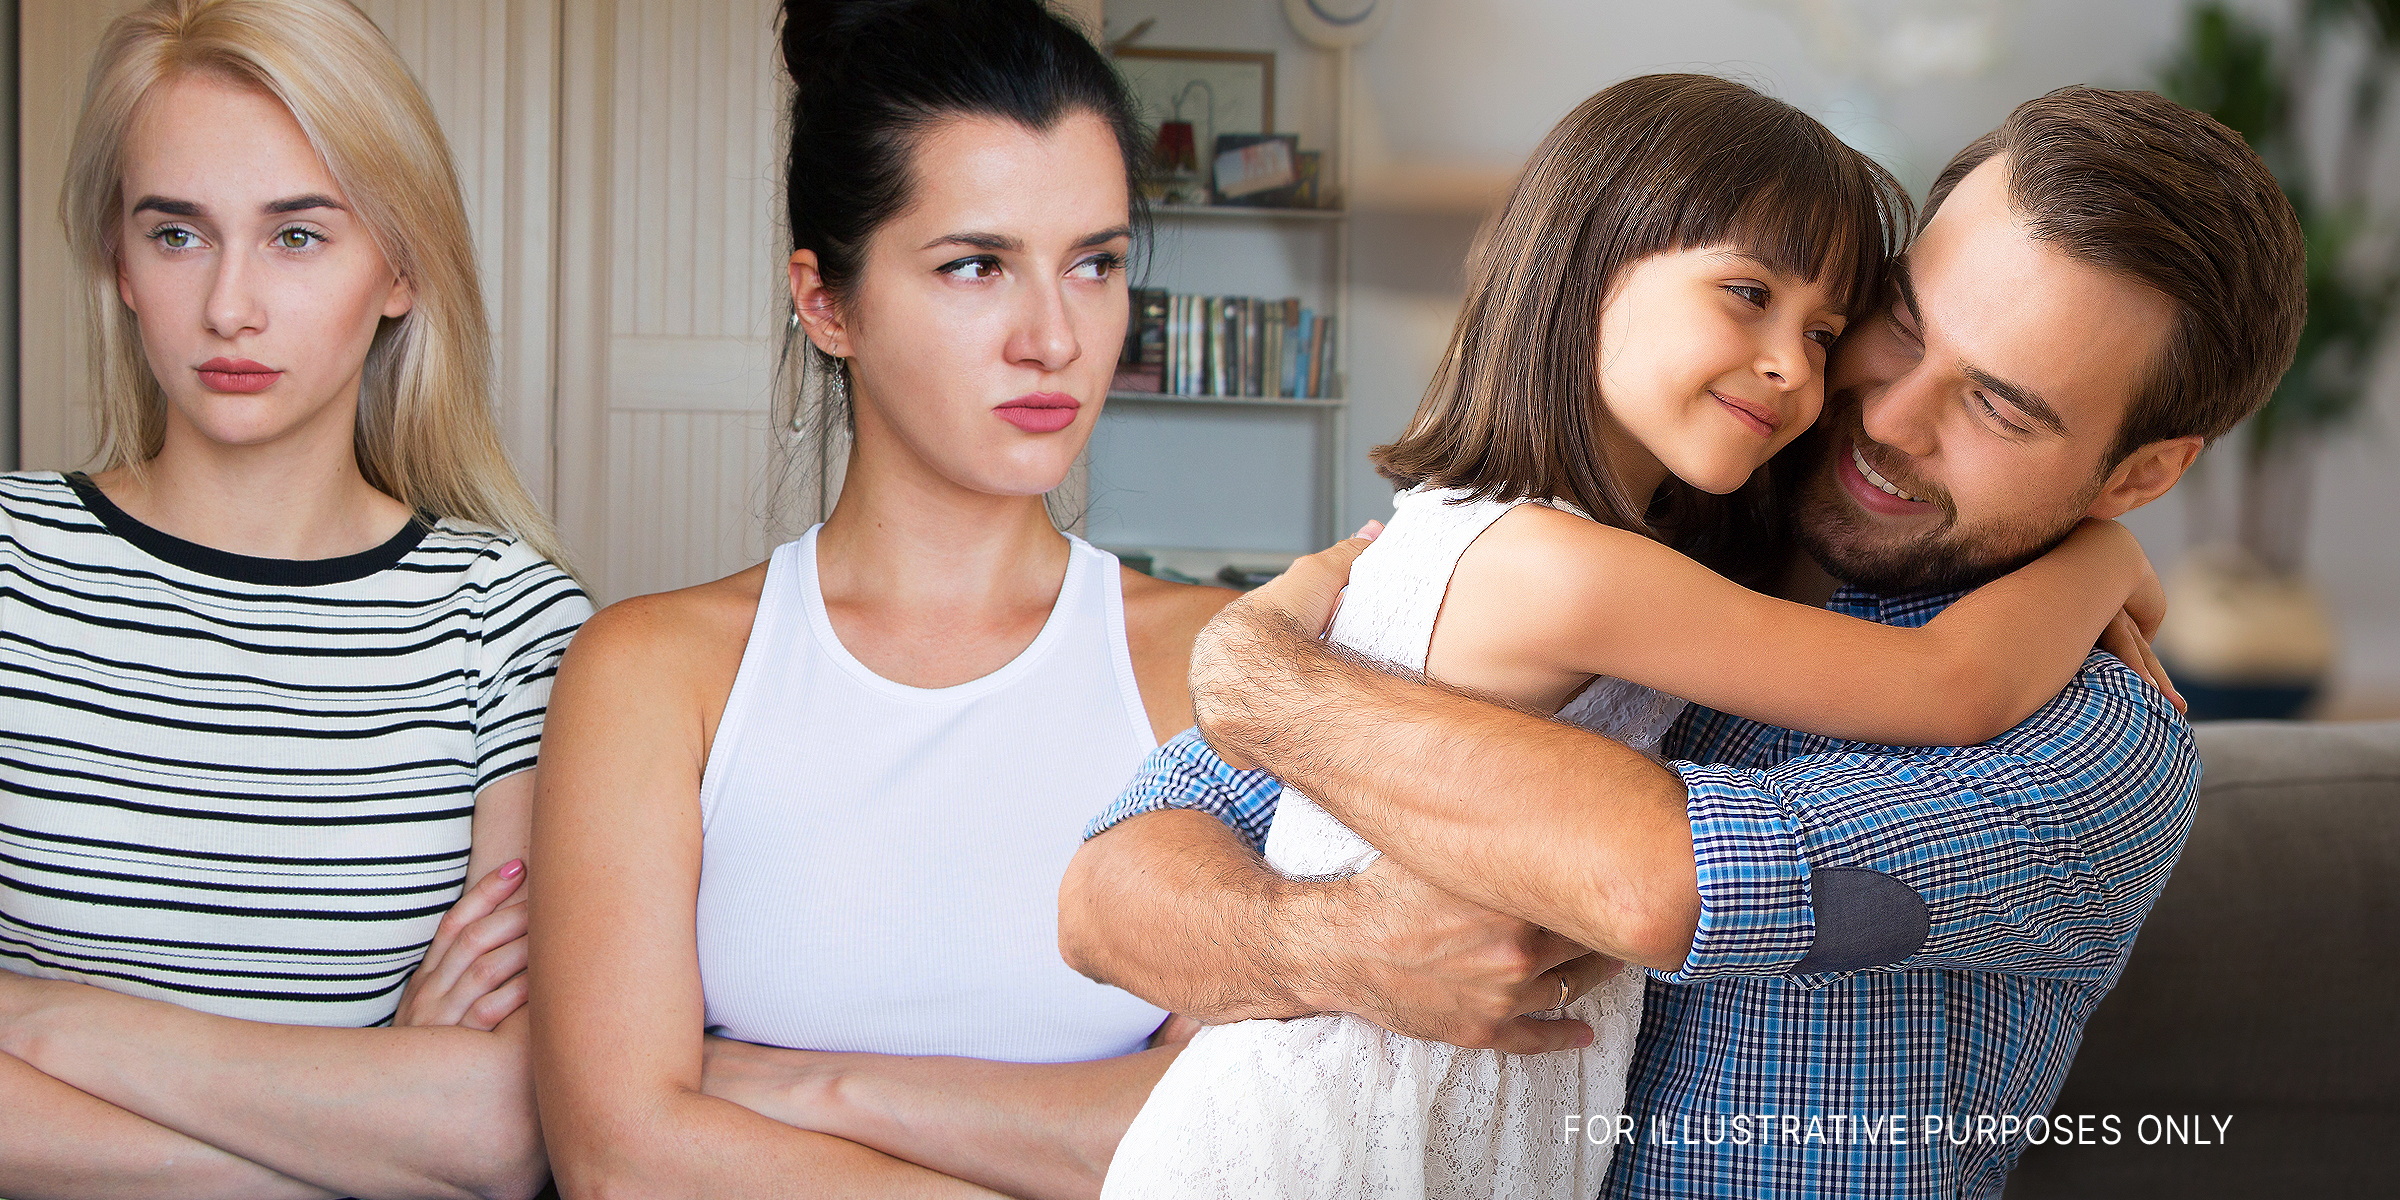 Two upset older girls while a man hugs his younger daughter tight | Source: Shutterstock